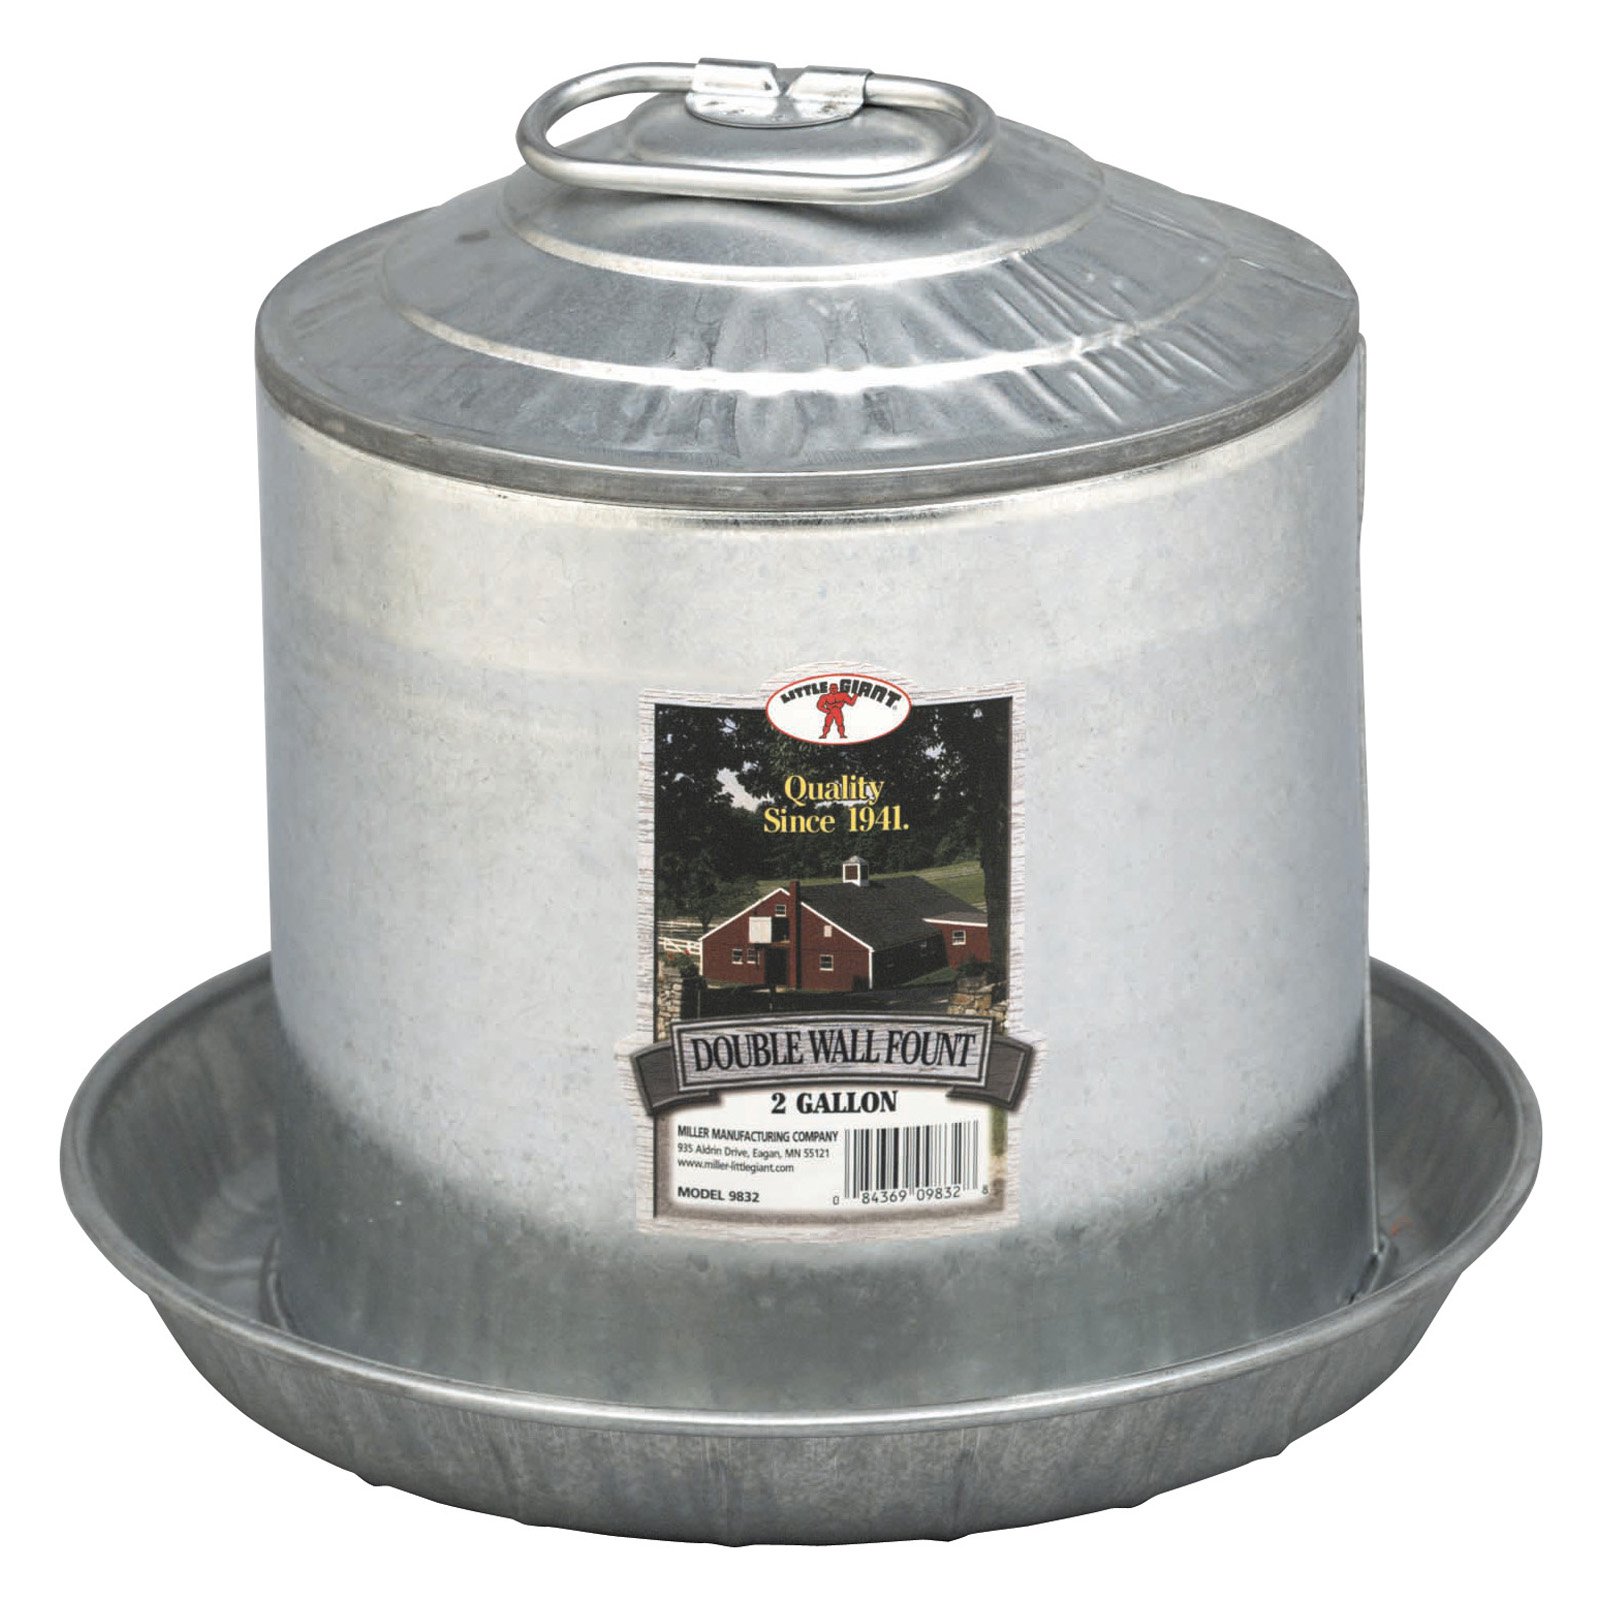 Miller Manufacturing Little Giant 3 gal Steel Poultry Waterer - image 2 of 2